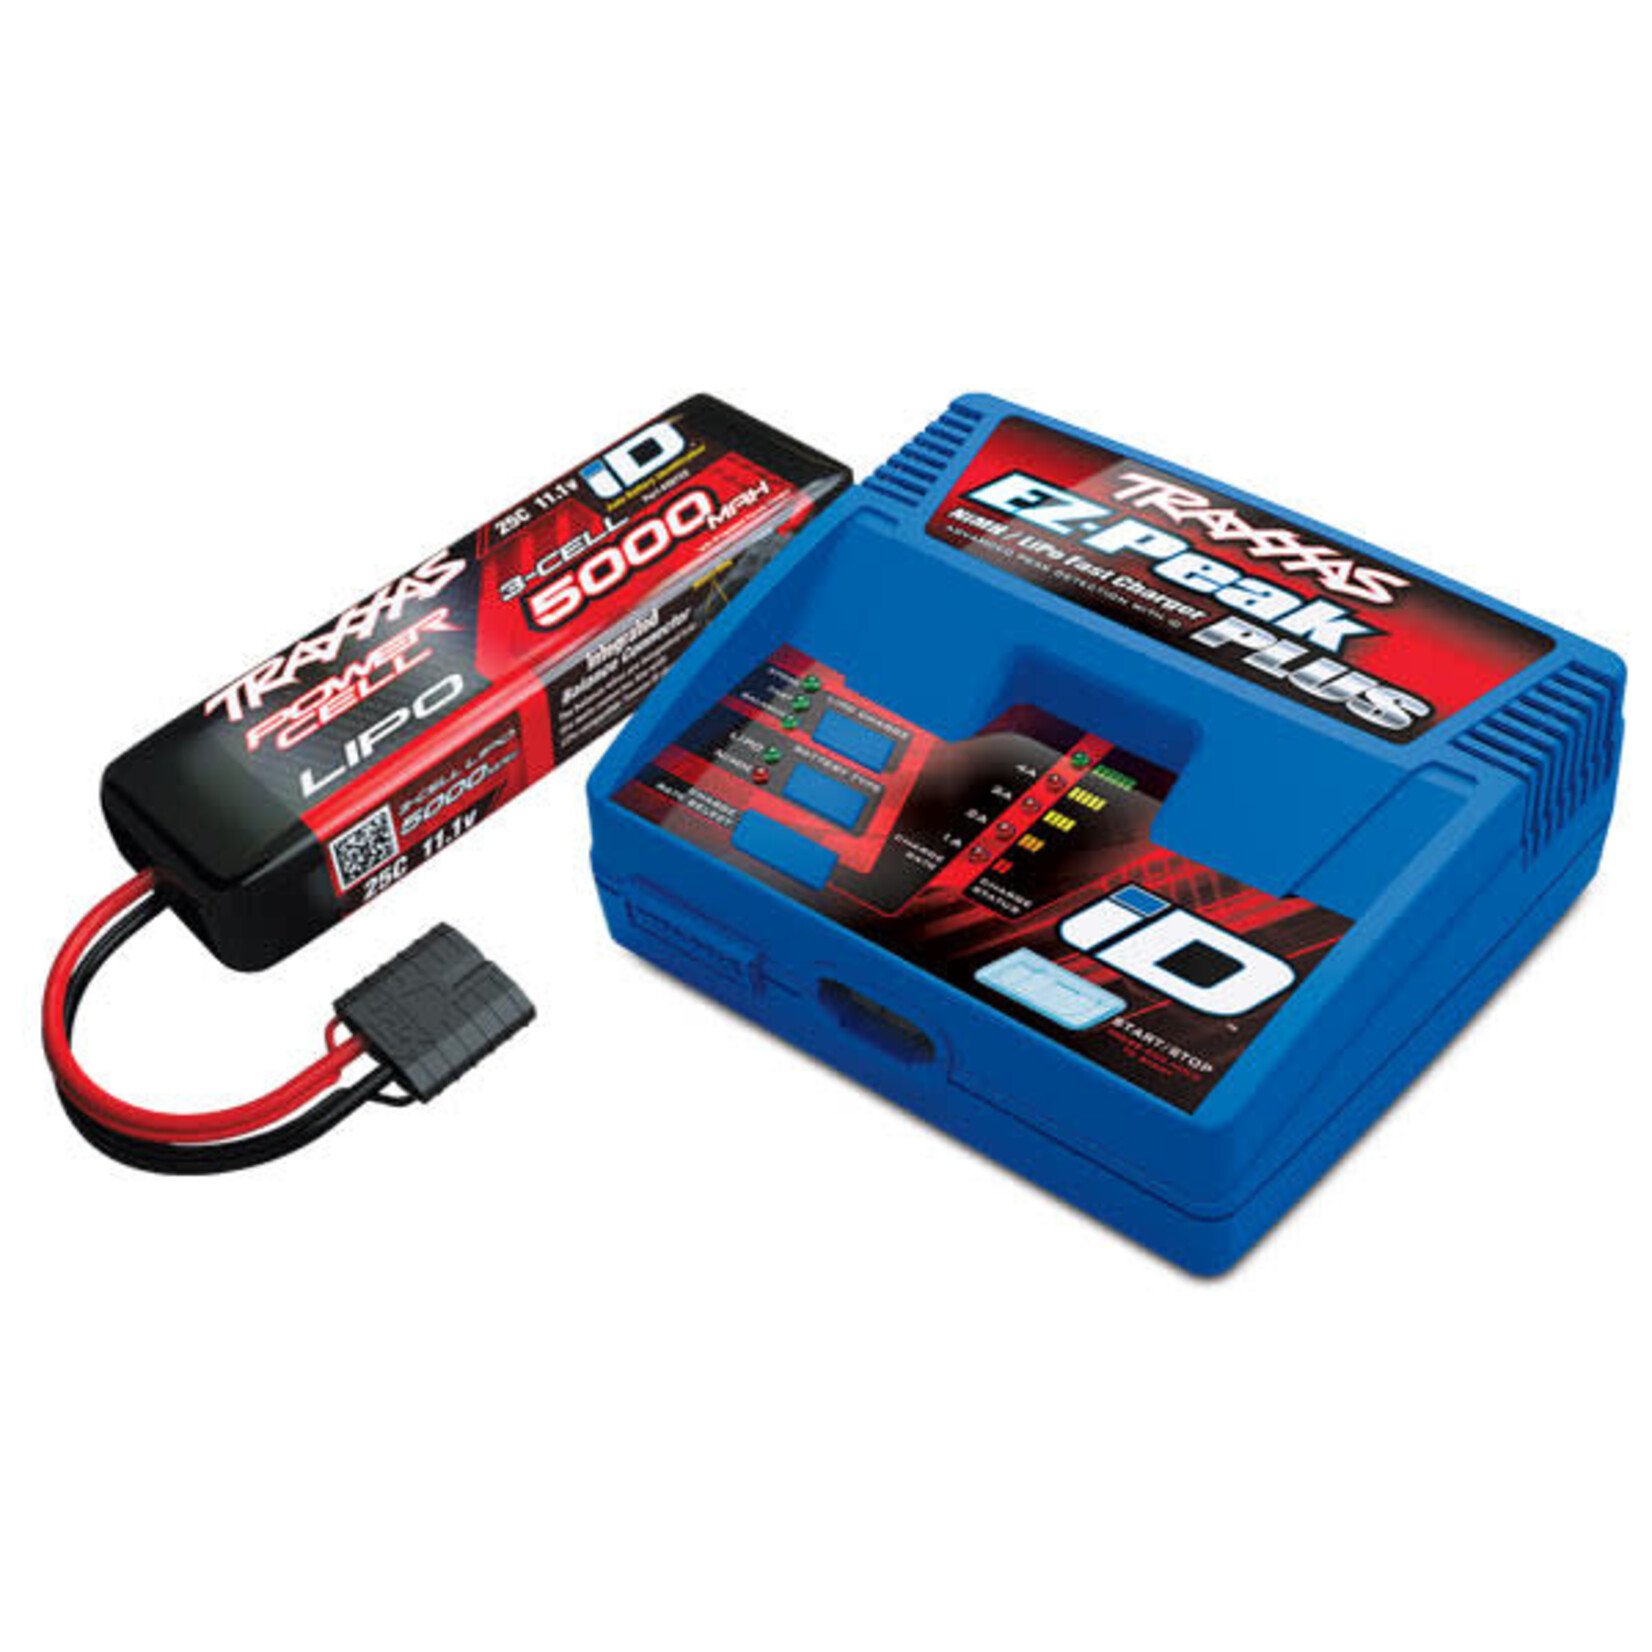 Traxxas Traxxas EZ-Peak 3S Single "Completer Pack" Battery Charger w/One Power Cell Battery (5000mAh) #2970-3S